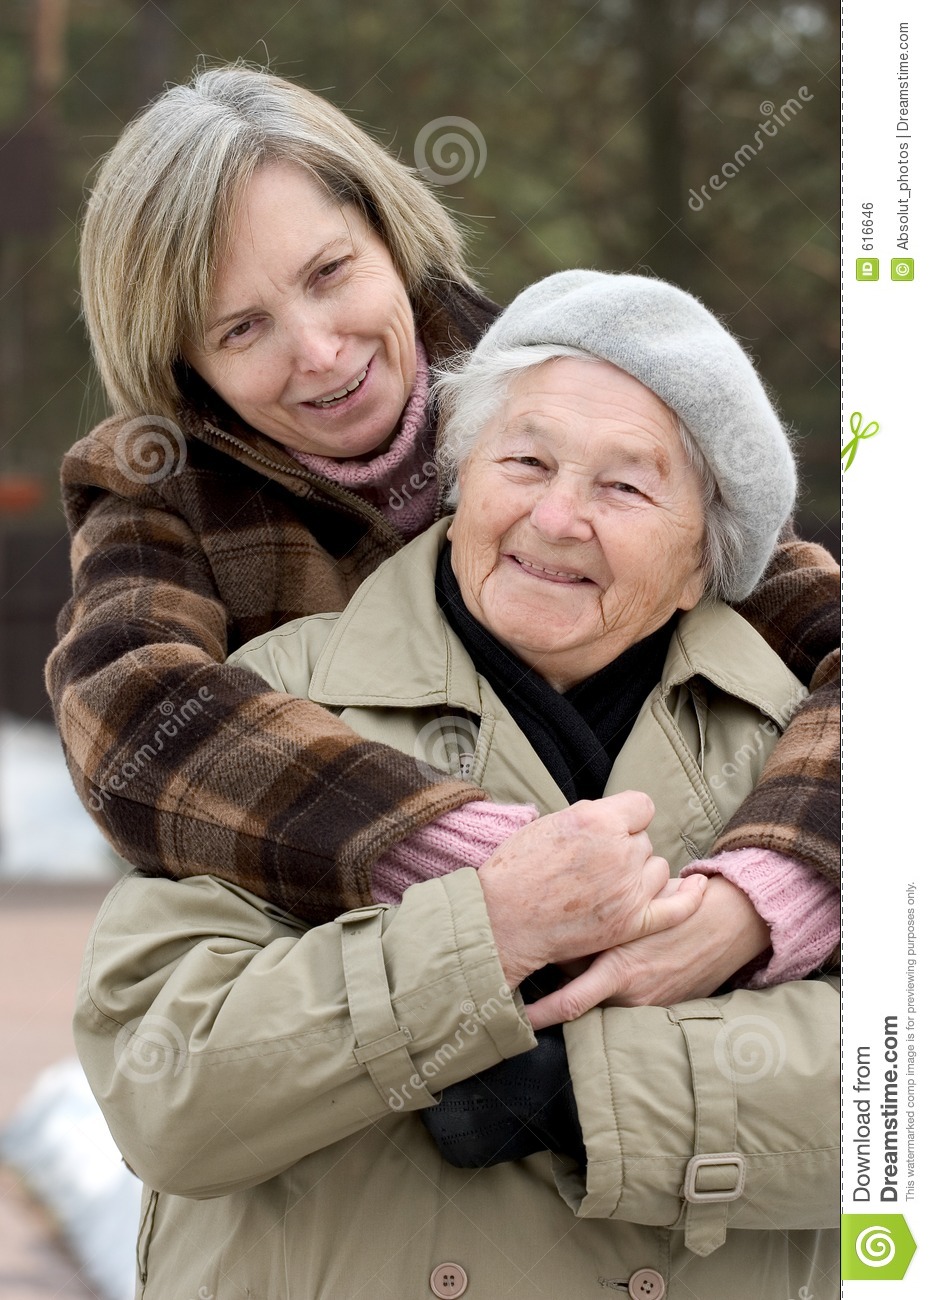 Mother And Daughter Hugging Royalty Free Stock Image   Image  616646